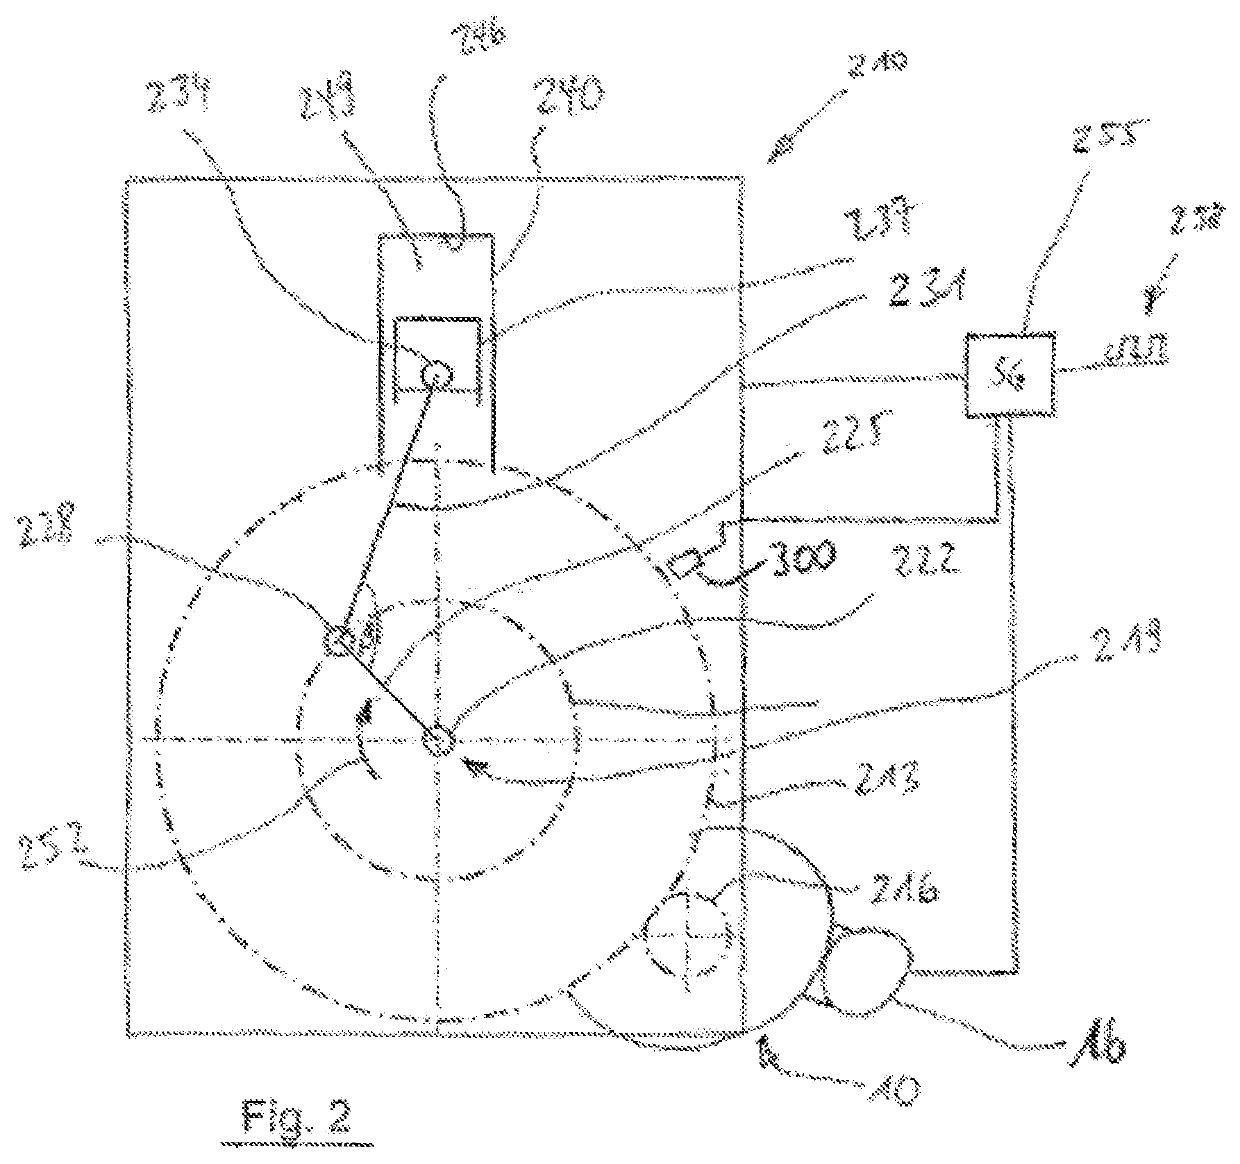 Method for meshing a starting pinion with a toothed ring of an internal combustion engine